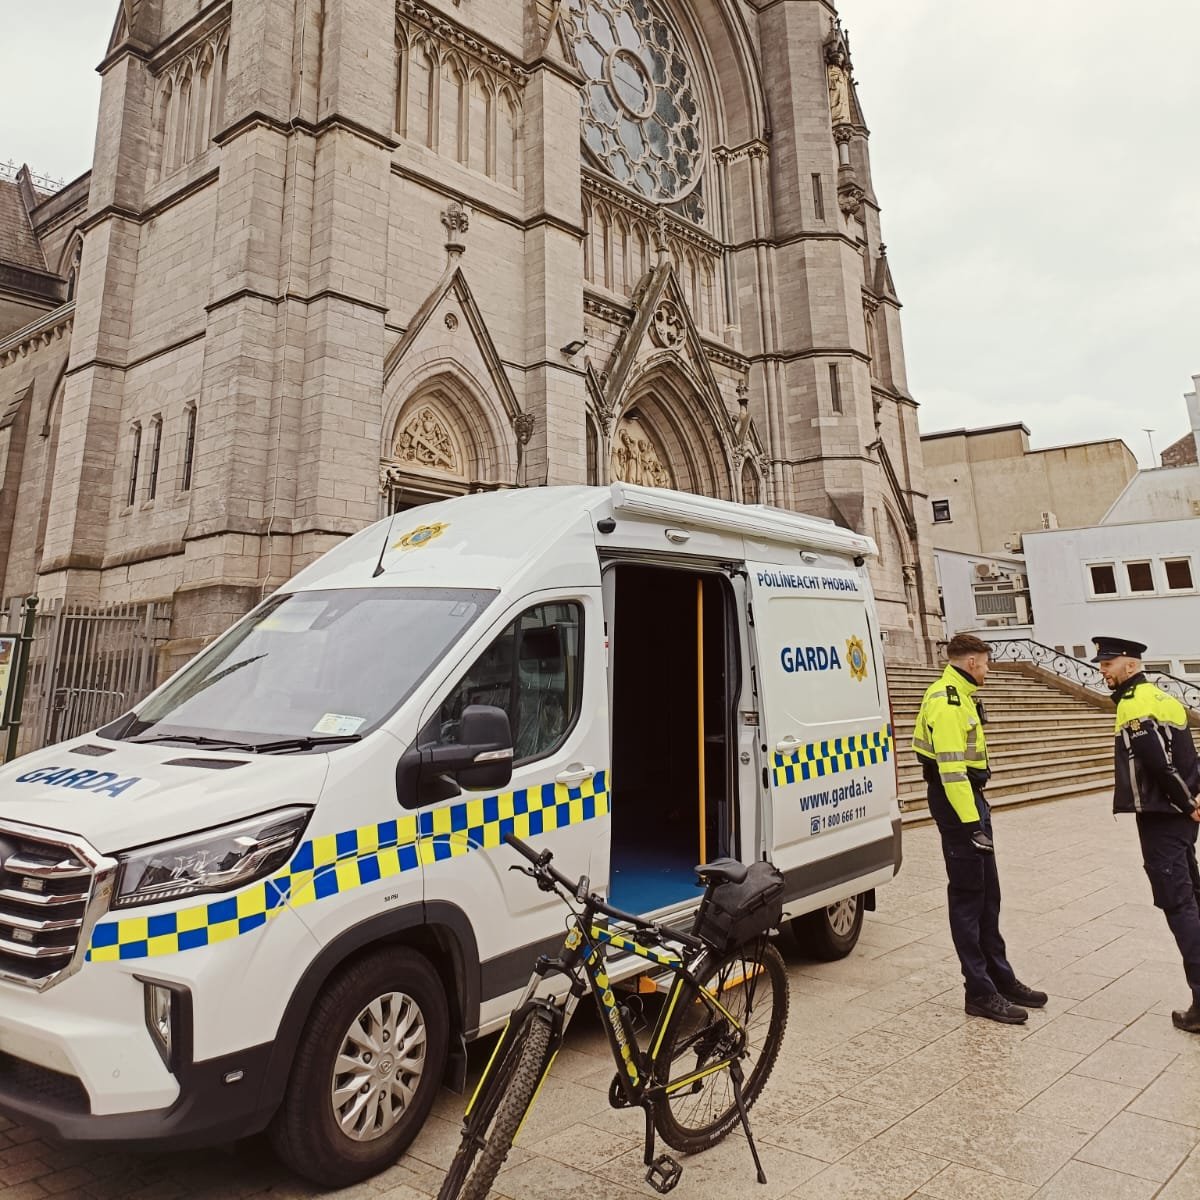 Wonderful to see An Garda Síochána on West Street this week with their new Divisional Community Engagement van as part of Operation Target 🚔 It’s great to have Community Garda beats on the street! @GardaTraffic @gardainfo #LoveDrogheda #VisitTown #ShopLocal #CommunityEngagement